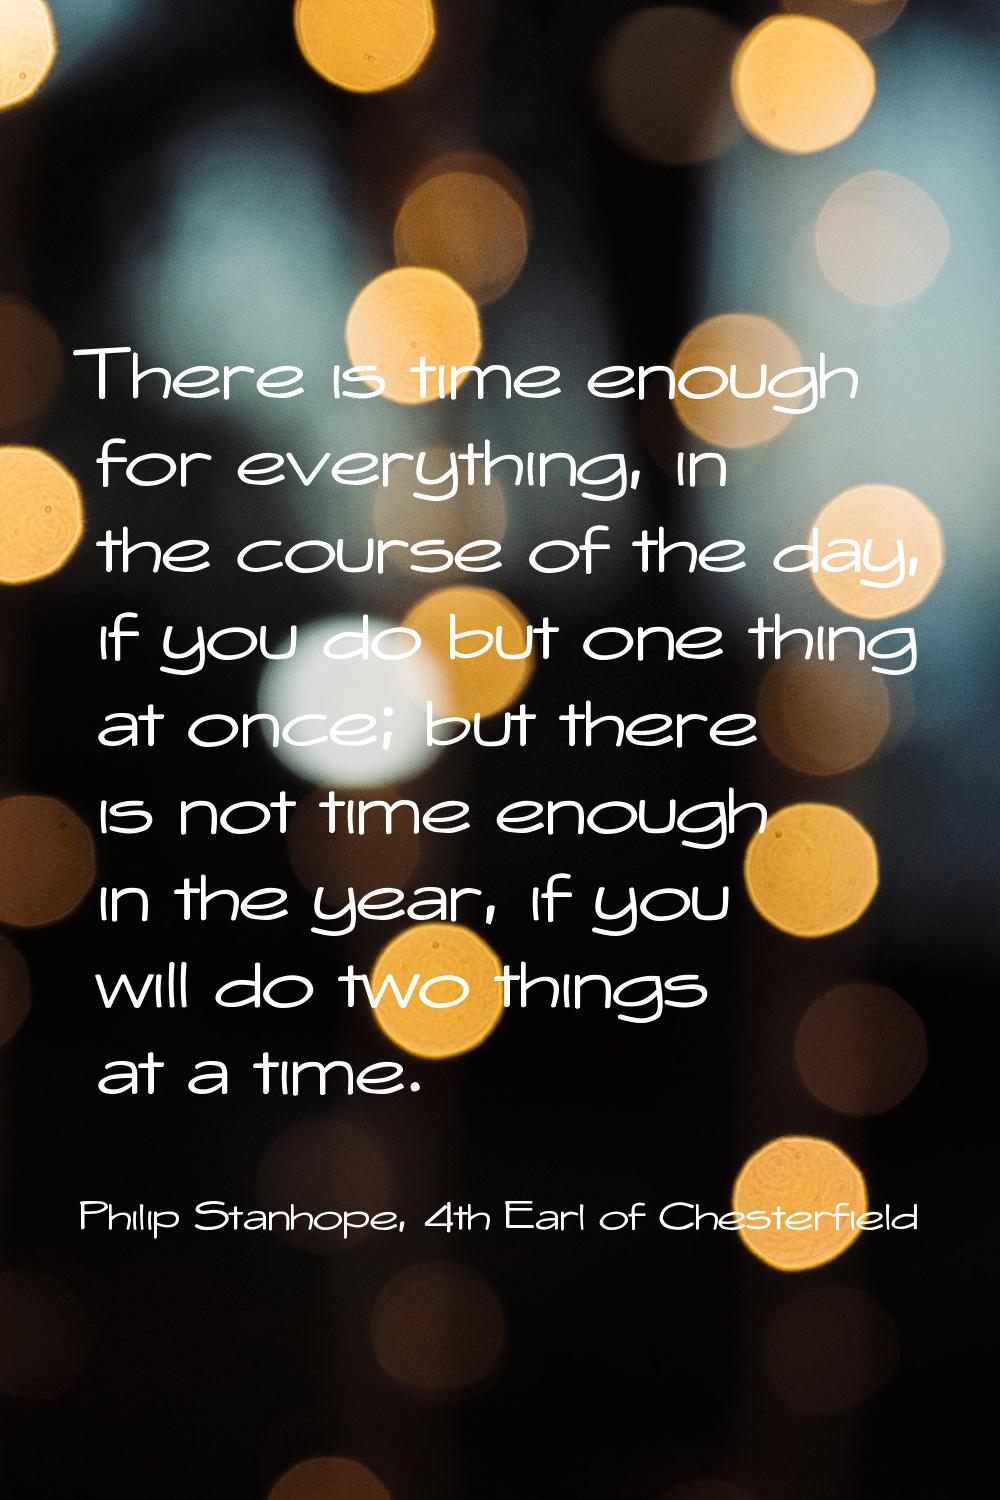 There is time enough for everything, in the course of the day, if you do but one thing at once; but